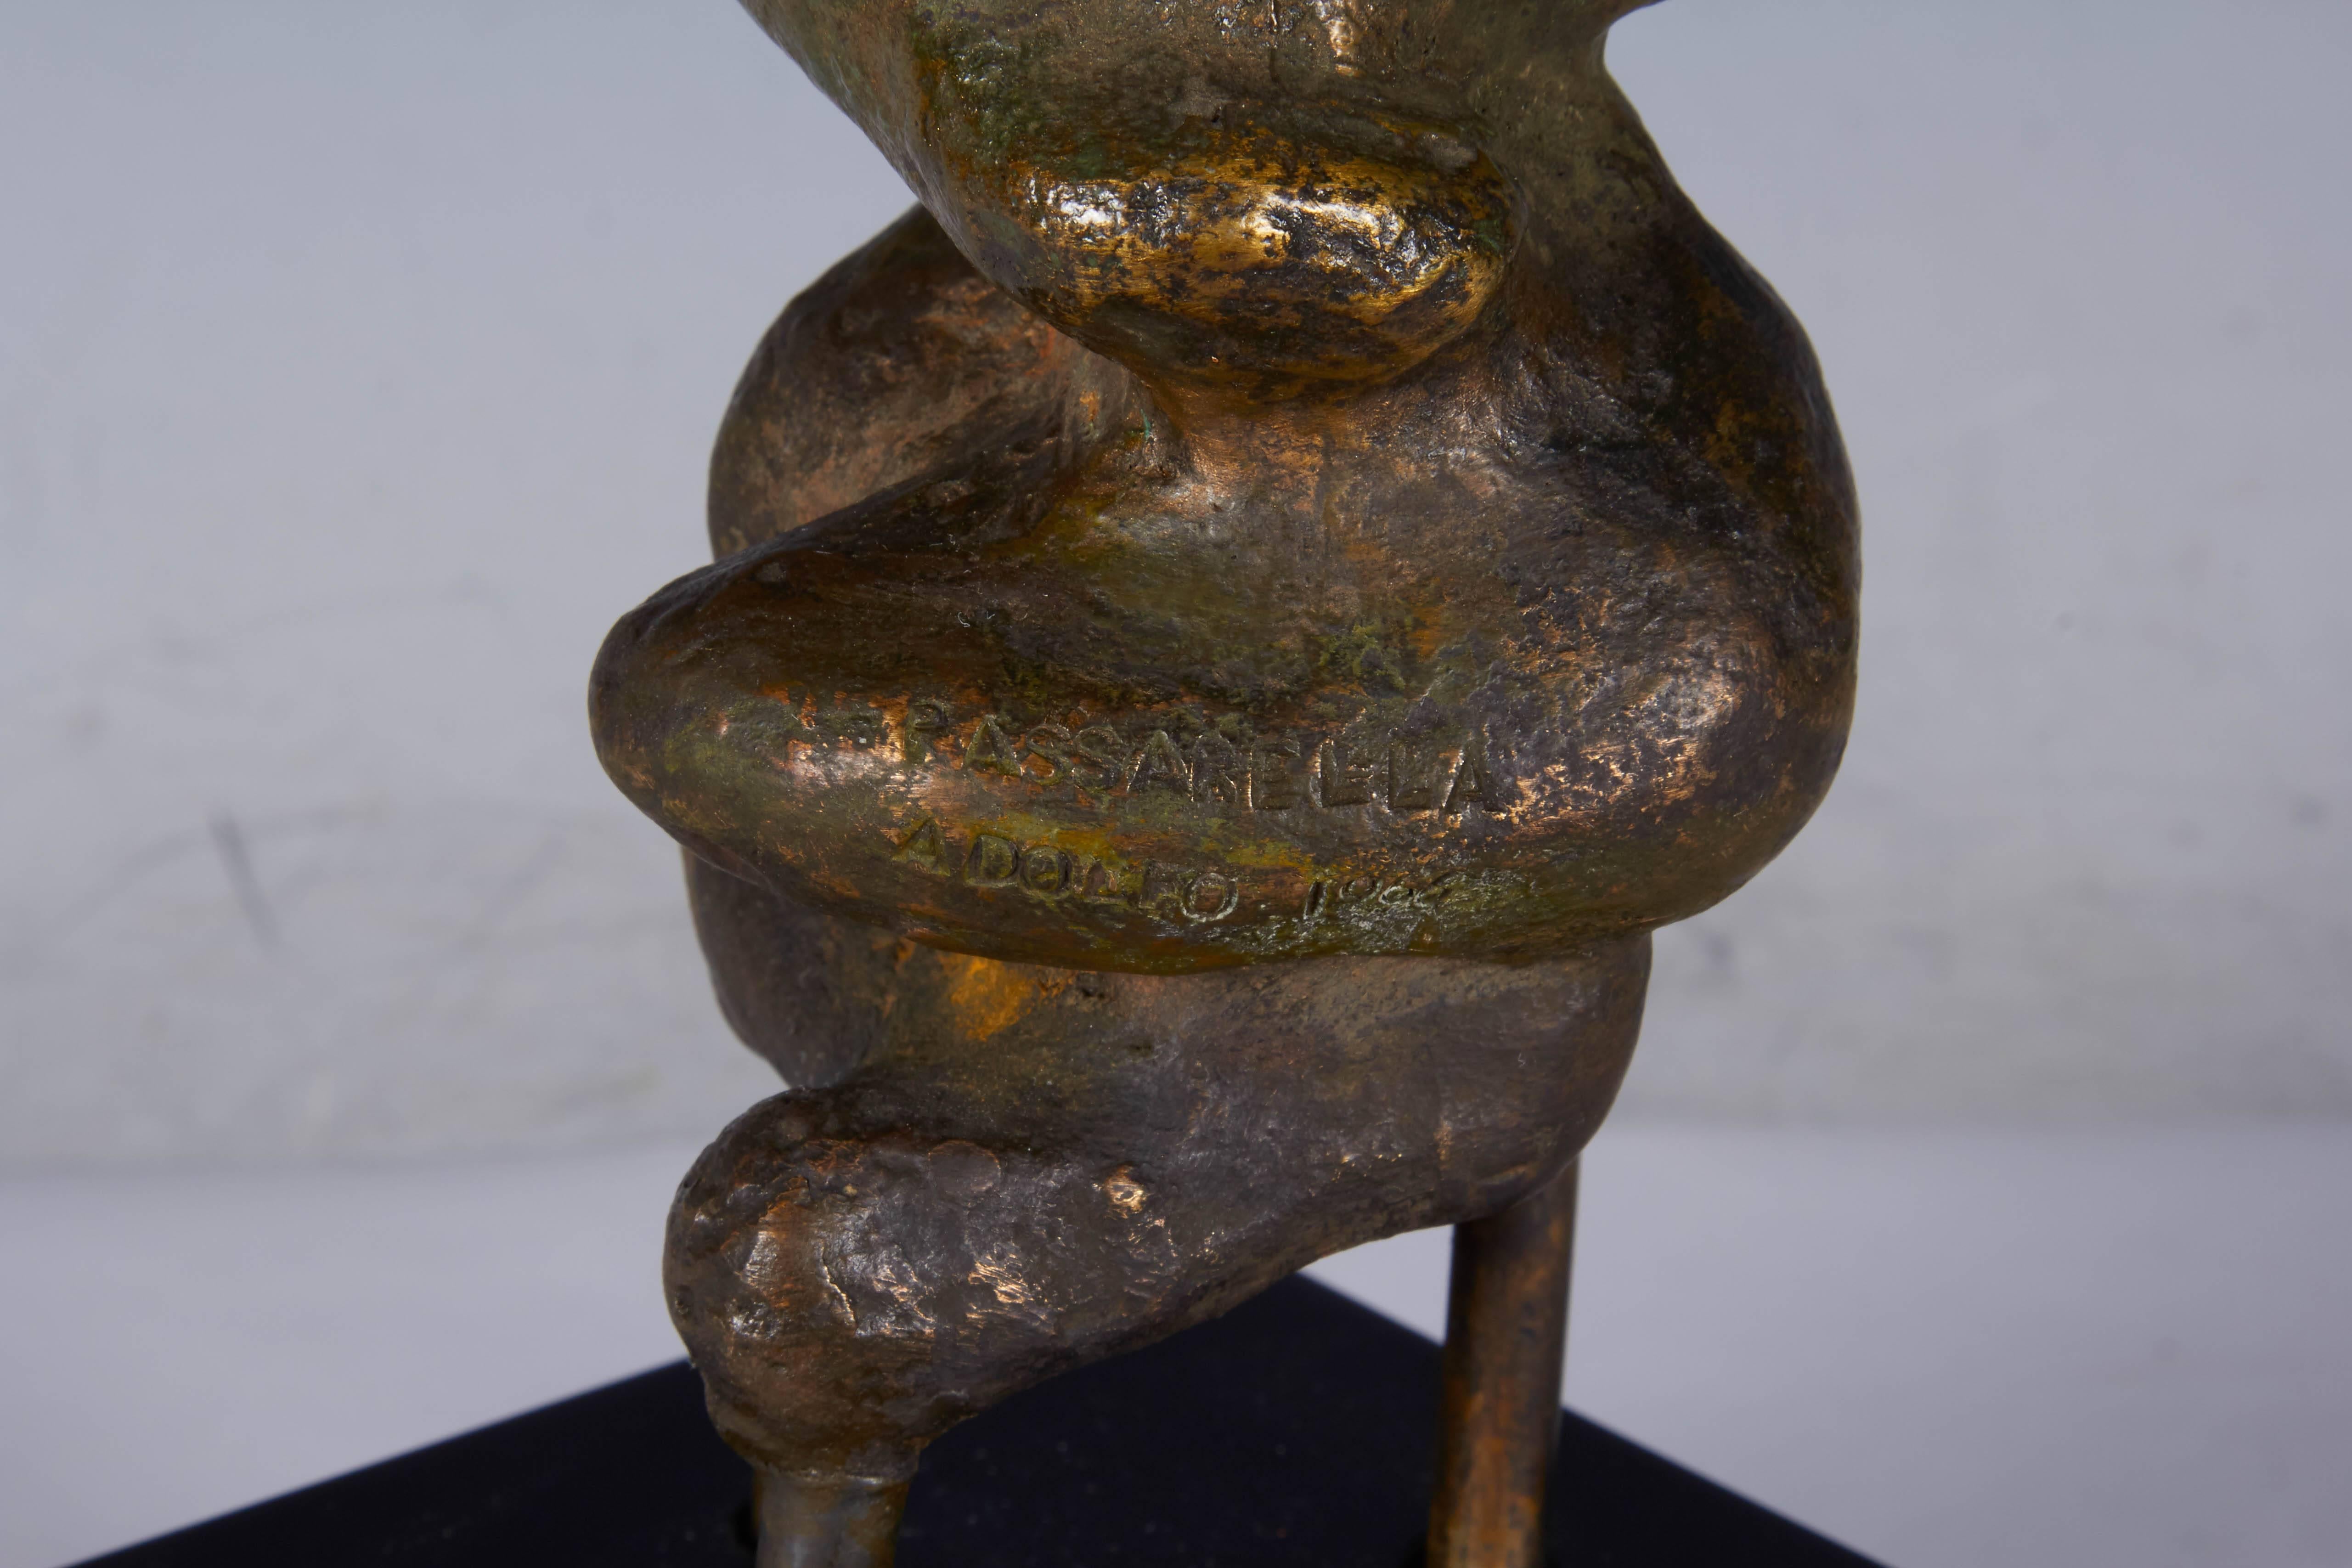 Adolfo Passarella Brutalist Abstract Bronze Sculpture, Signed and Dated 2